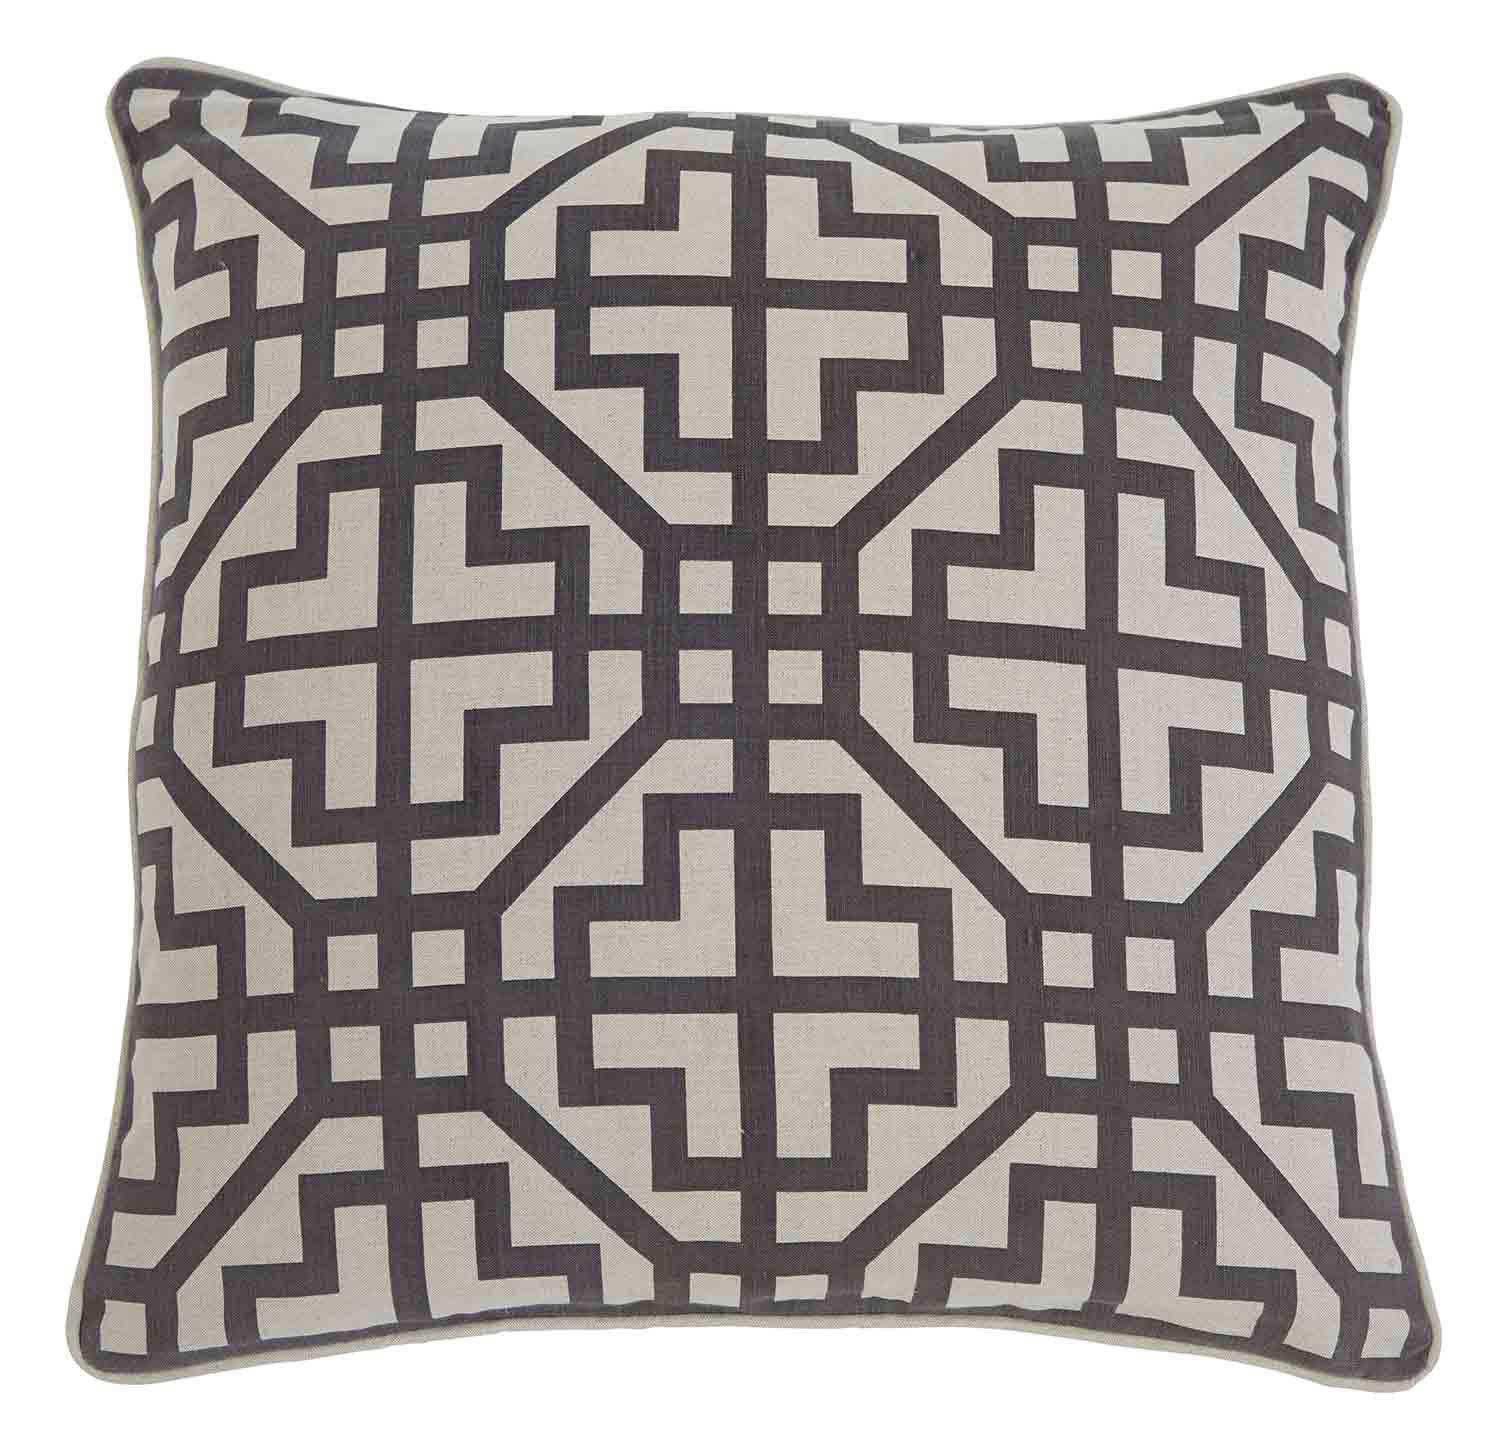 Ashley Geometric Pillow Cover - Charcoal